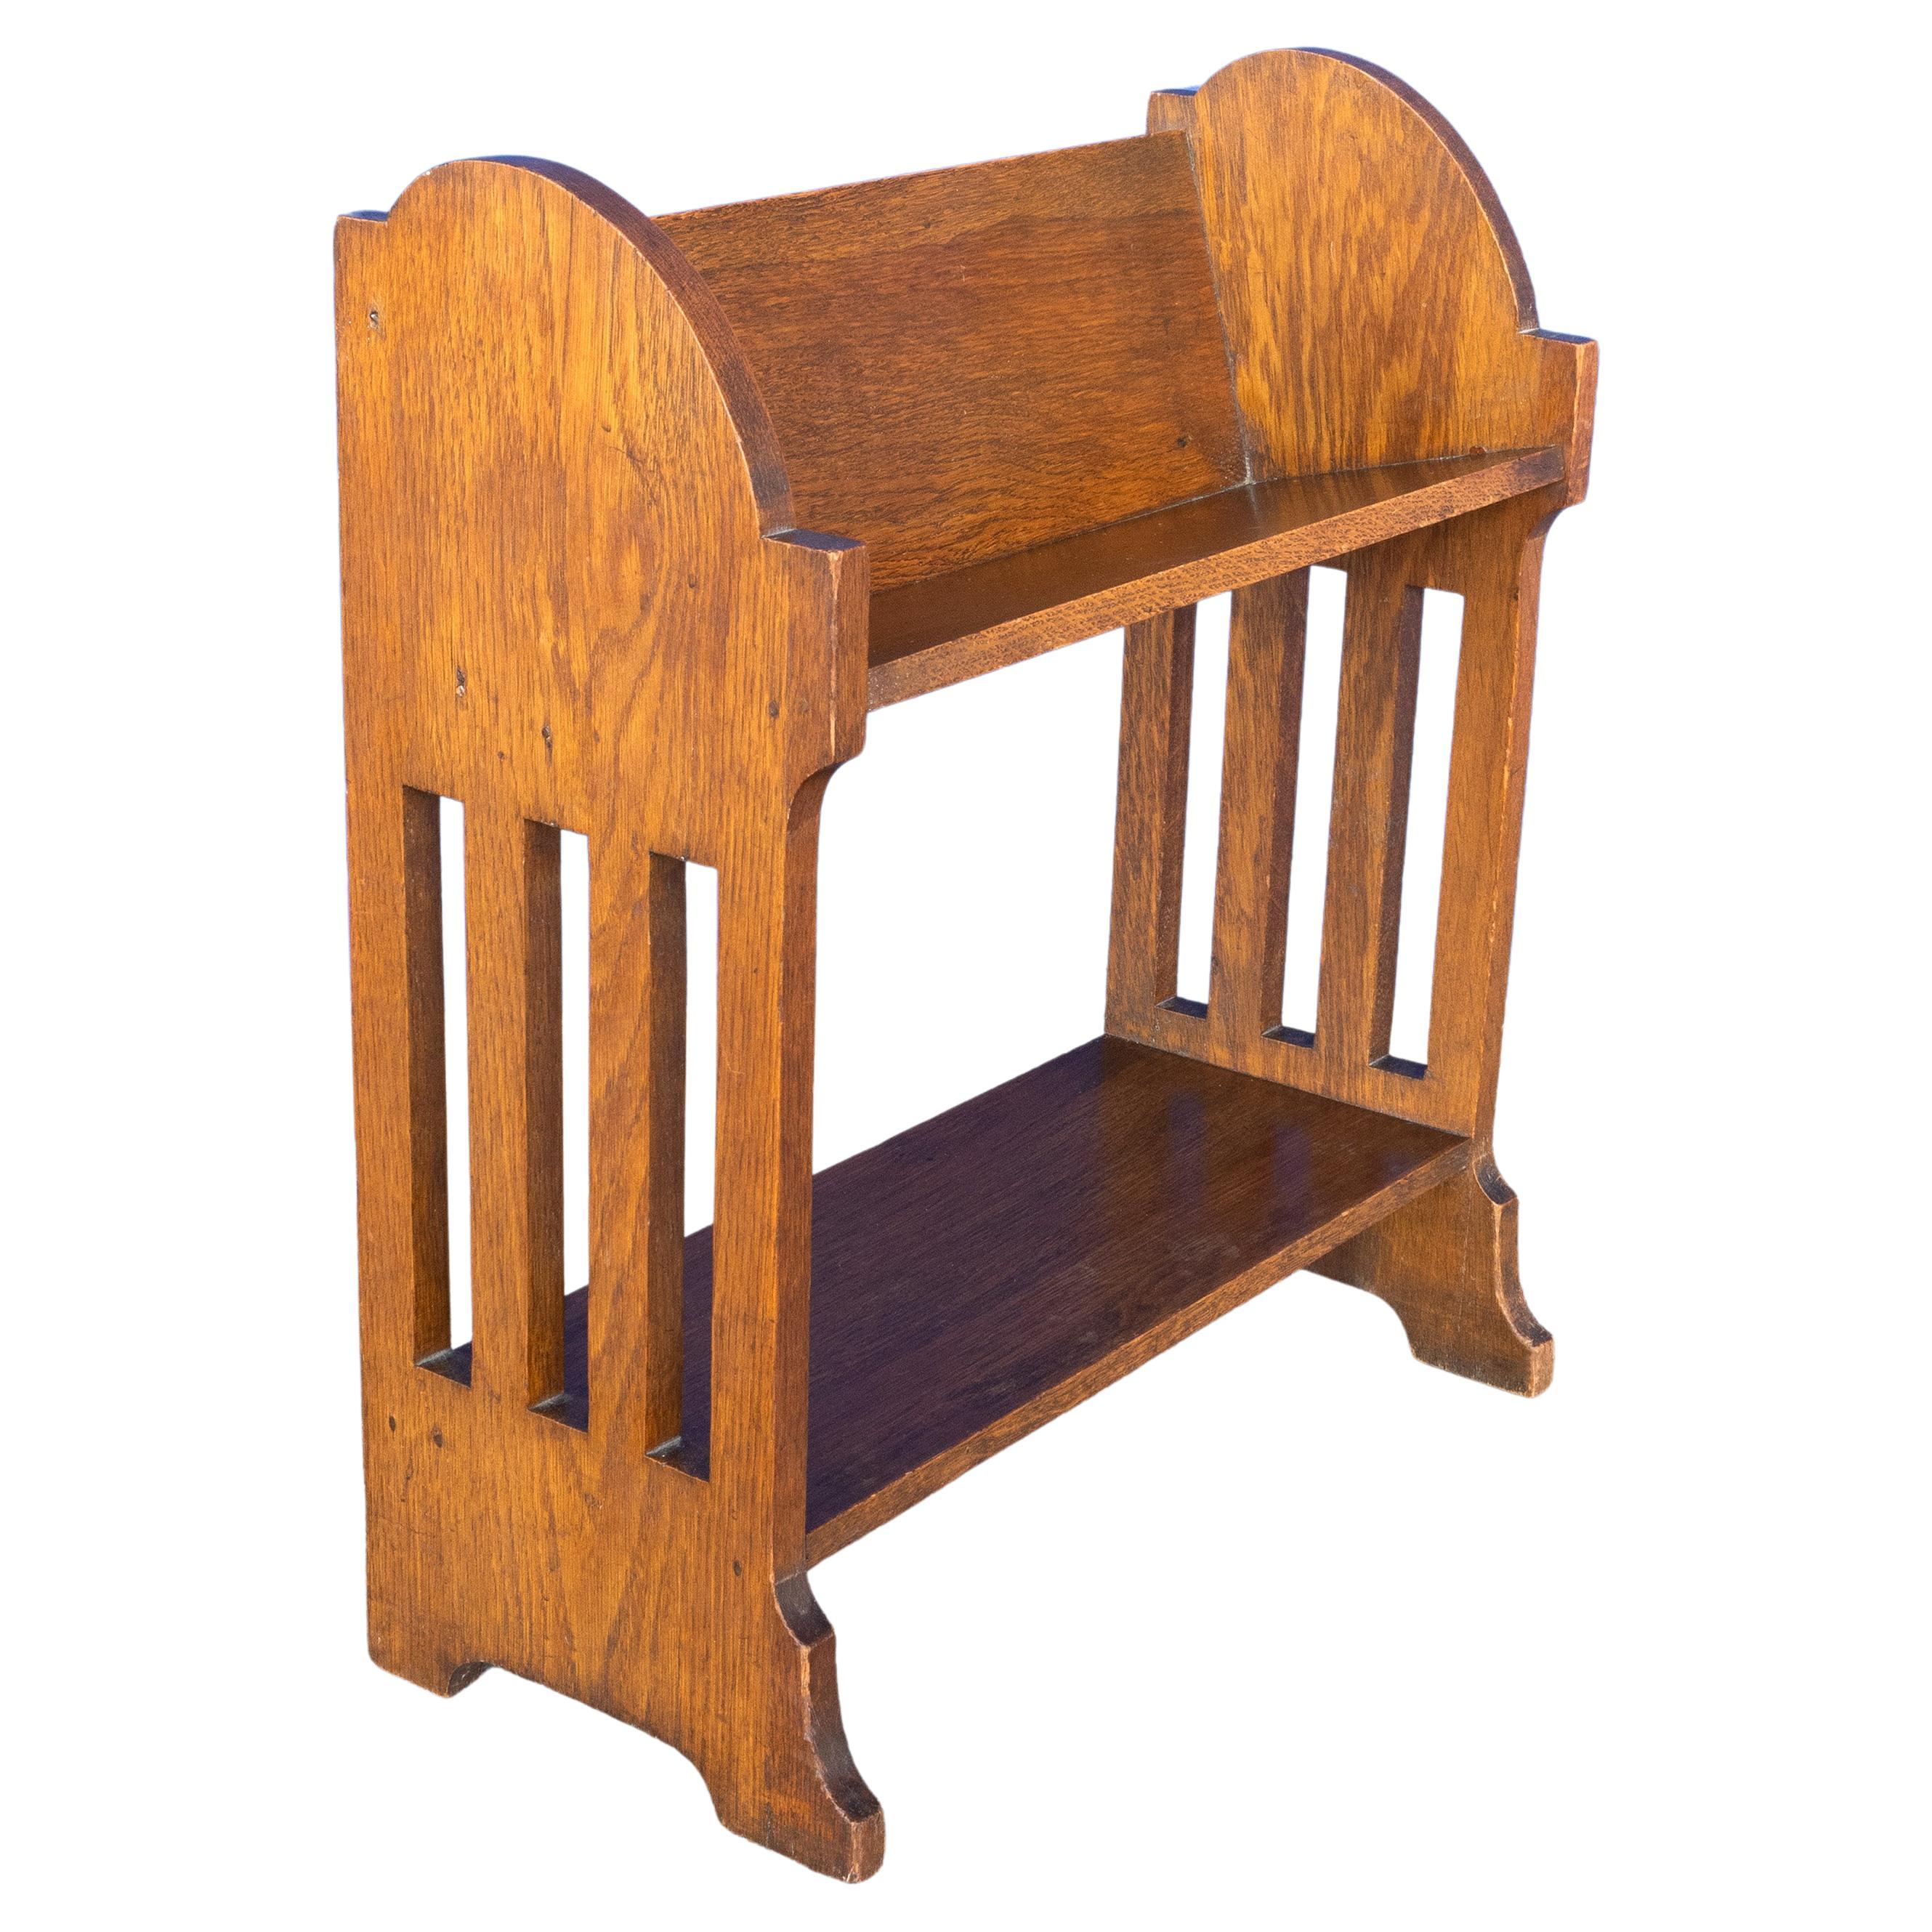 English Arts And Crafts Golden Oak Trough Table Top Bookcase Liberty Of London  For Sale